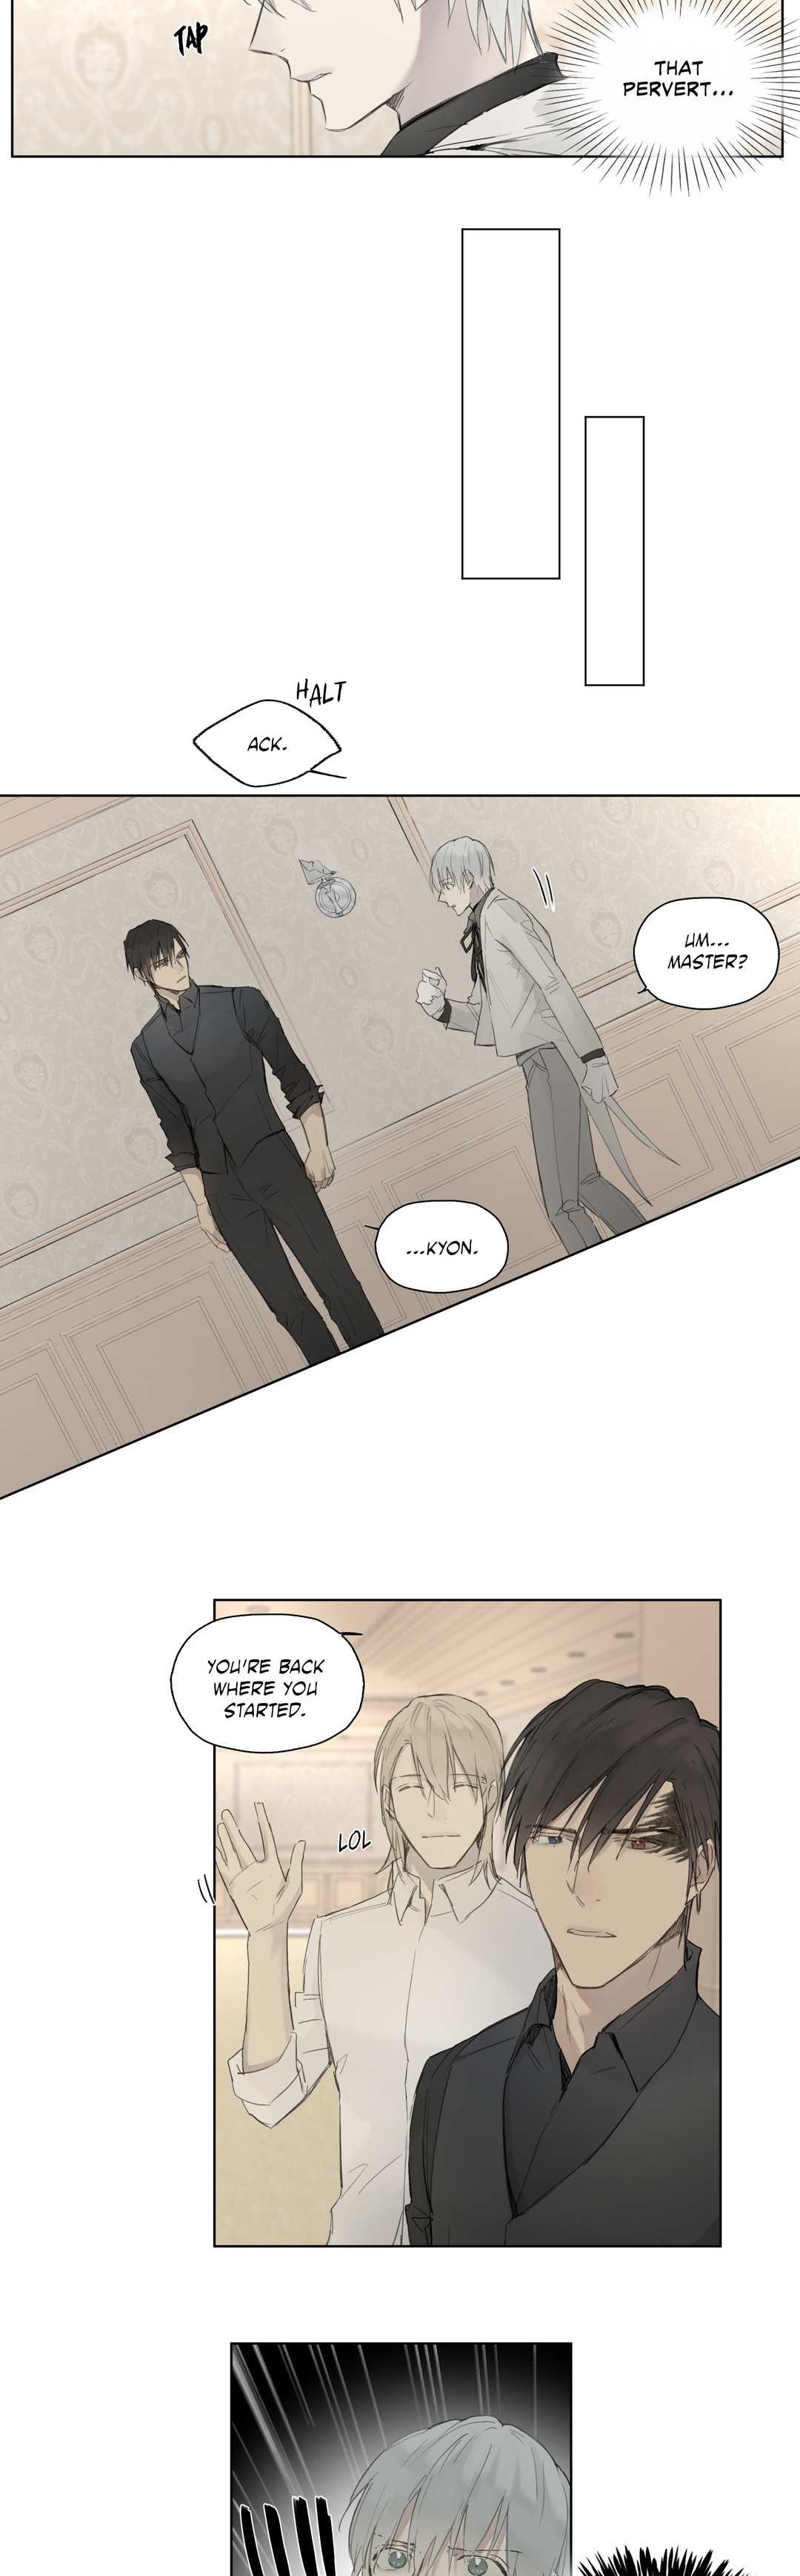 Royal Servant - Chapter 28 Page 5